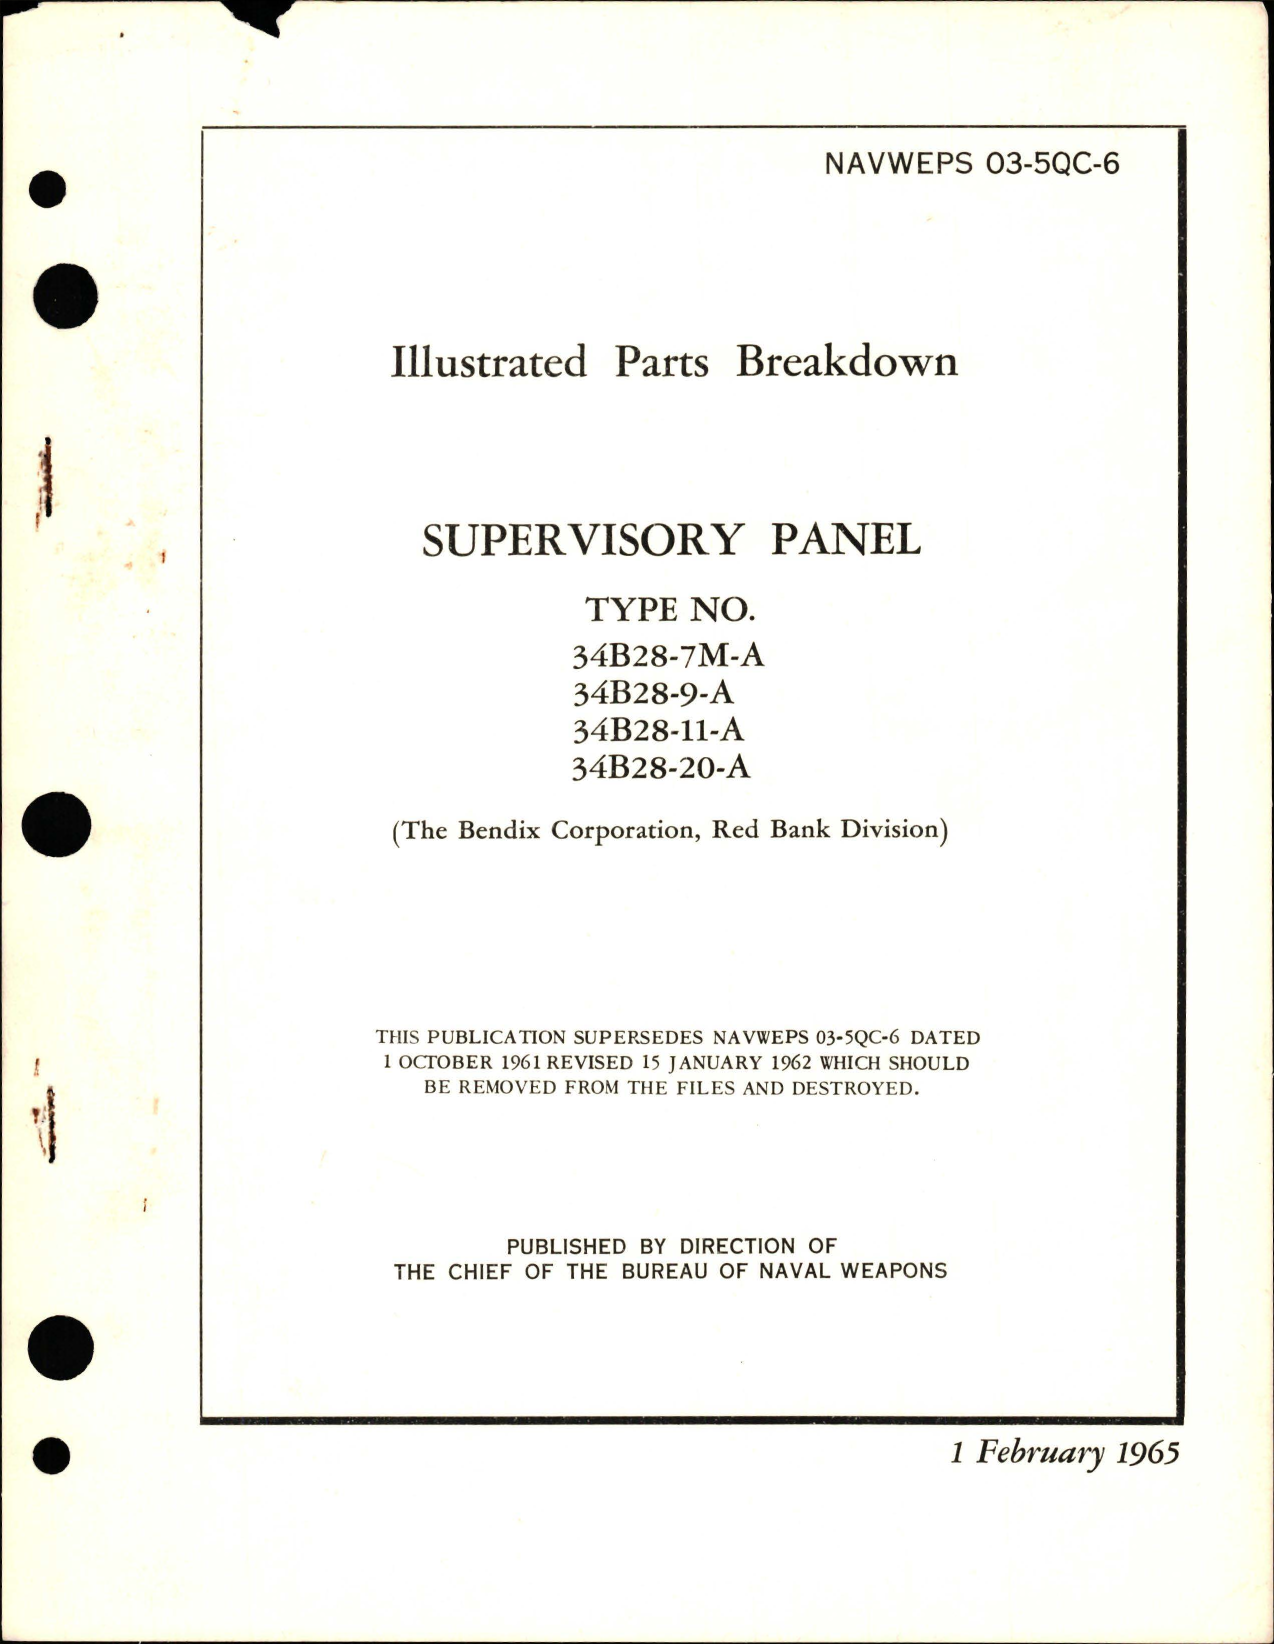 Sample page 1 from AirCorps Library document: Illustrated Parts Breakdown for Supervisory Panel - Types 34B28-7M-A, -9-A, -11-A, -20-A